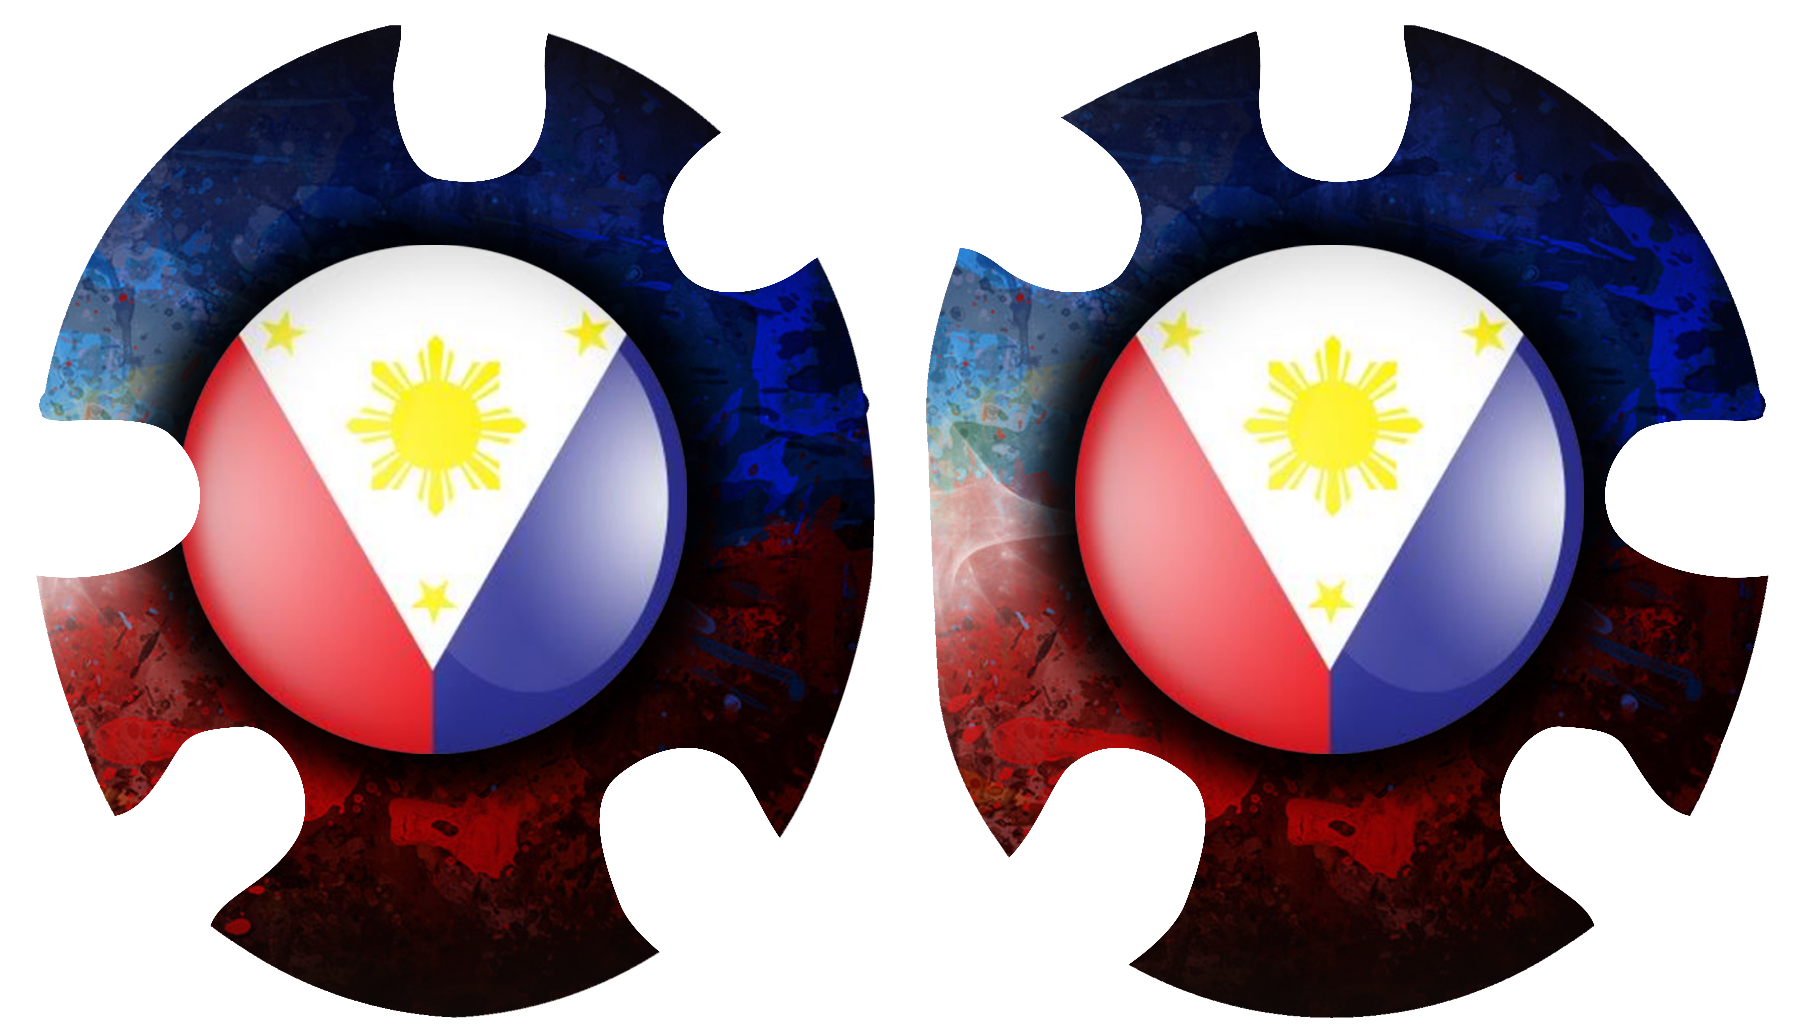 philippines flag logo png